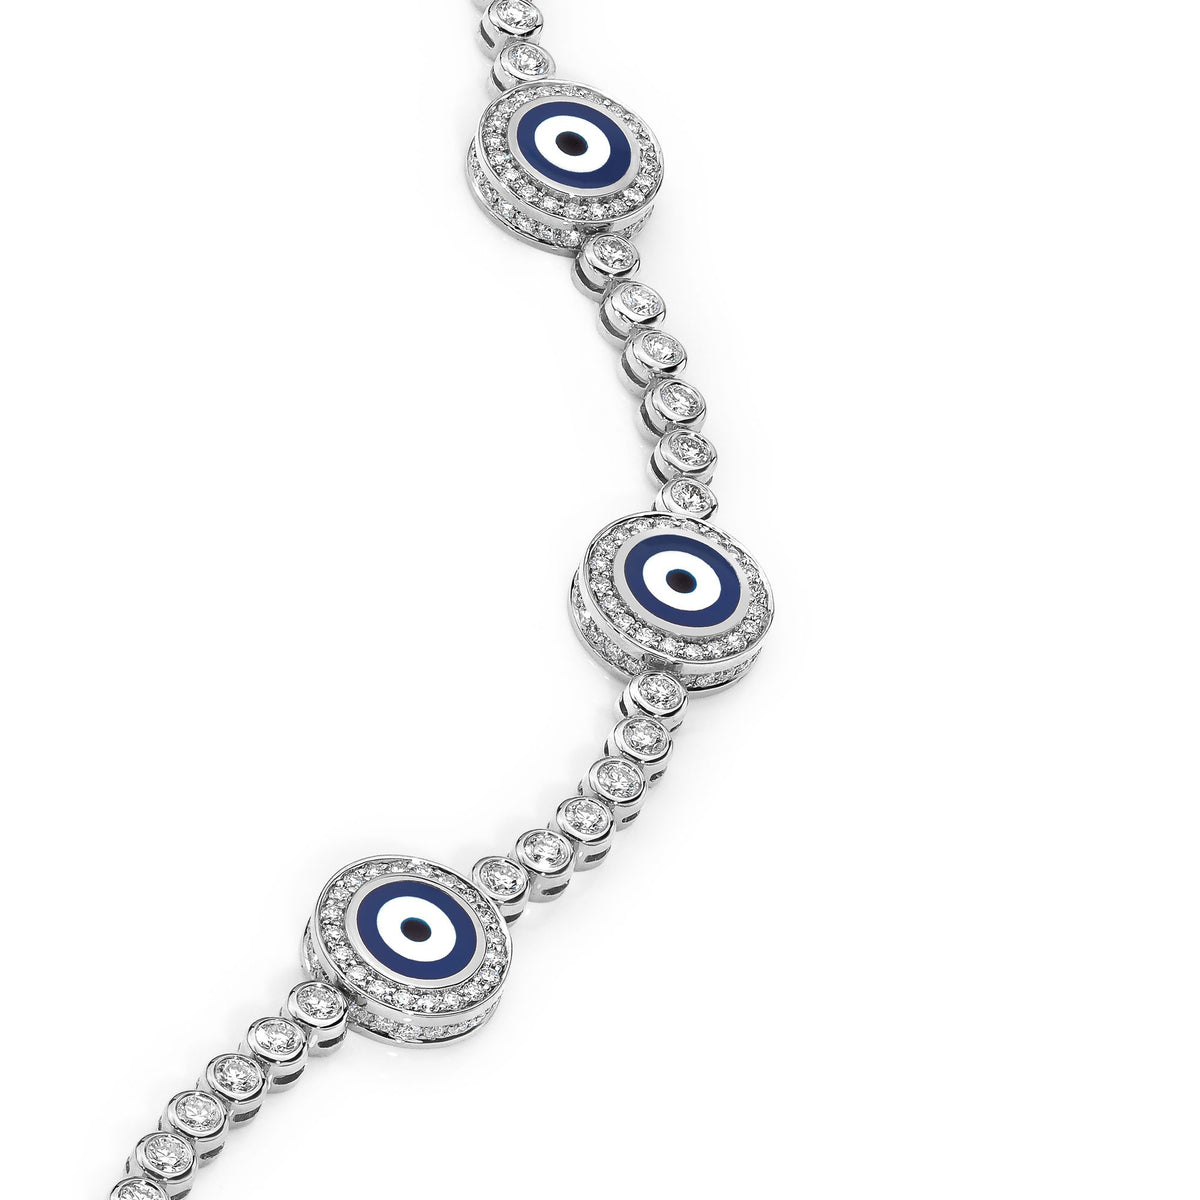 Aaron Basha 18K Baguette Diamond Charms on Diamond Bracelet - Items Sold Separately 18K White Gold Baguette Horseshoe with Pink Sapphires - Pre Order